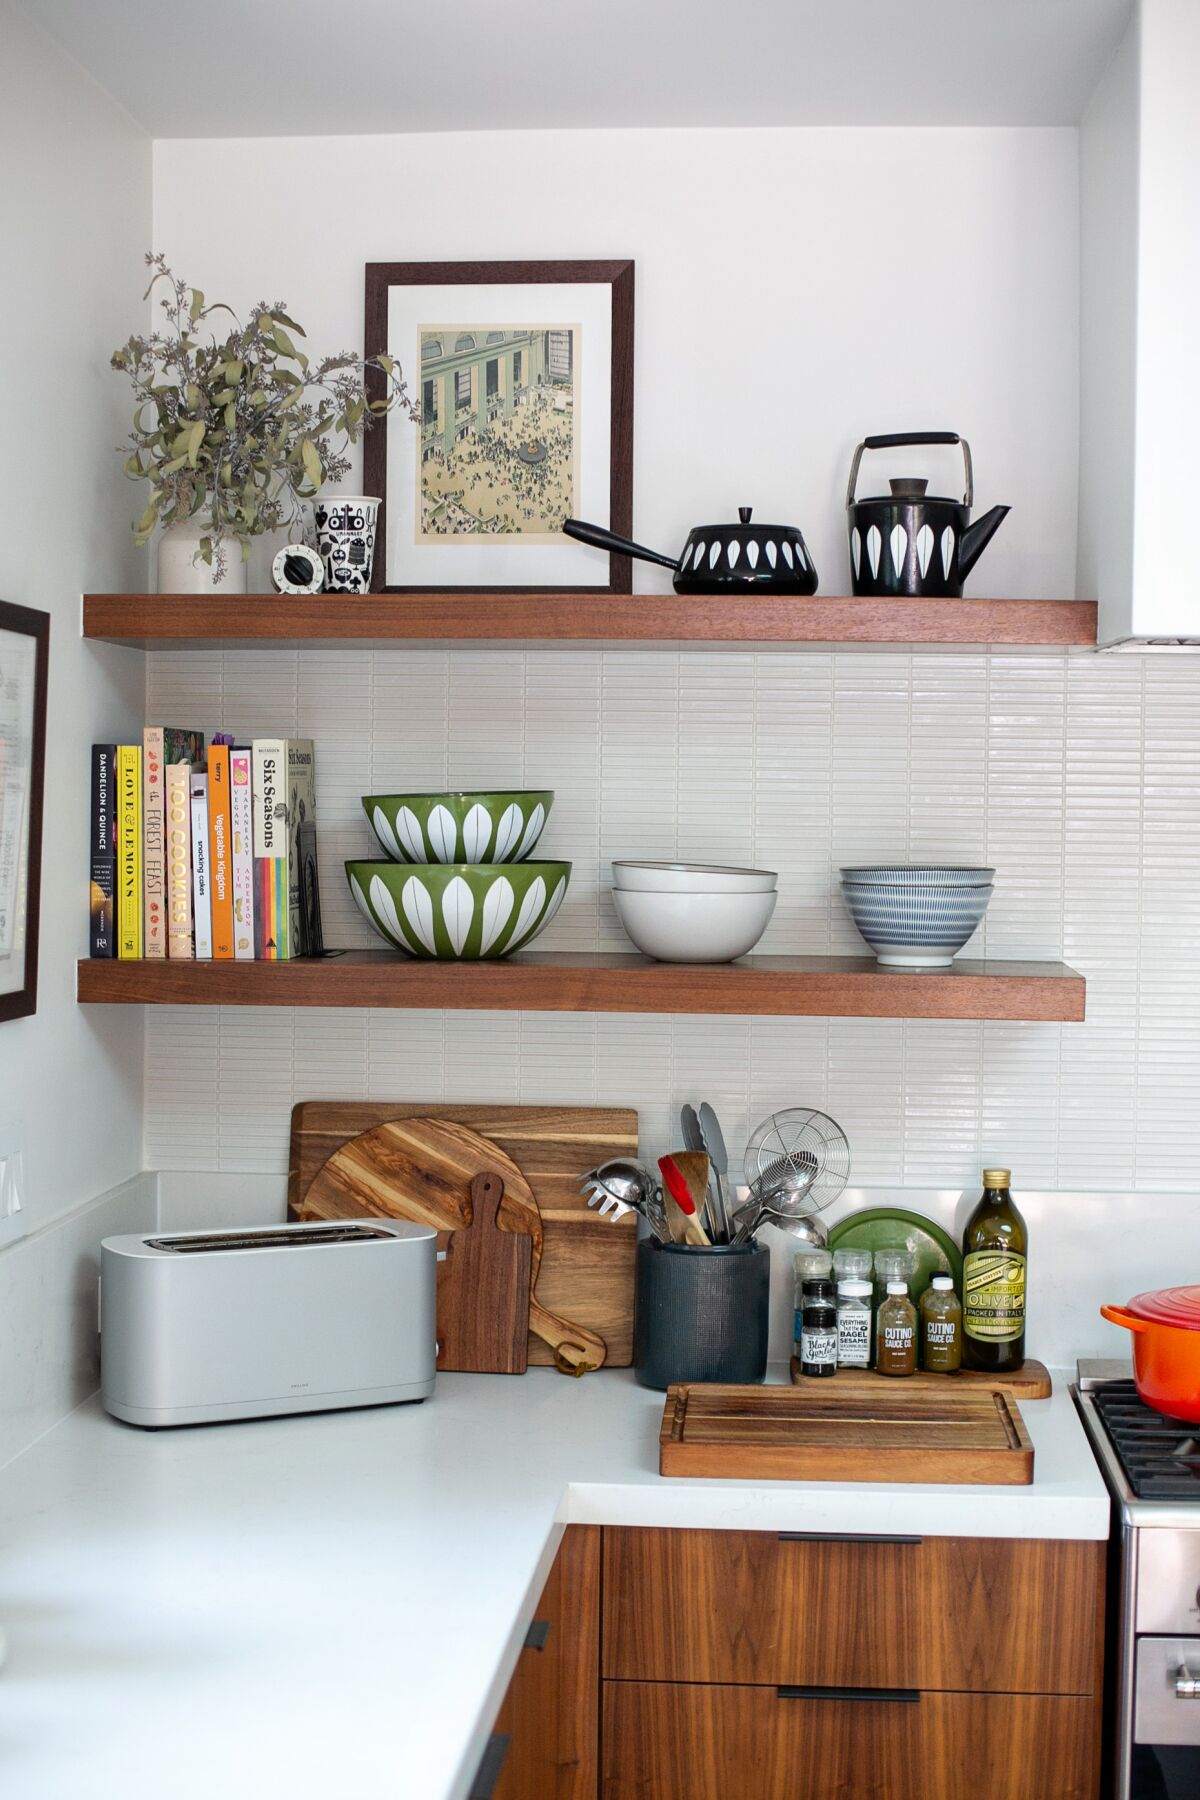 Bowls on kitchen shelves above a counter  